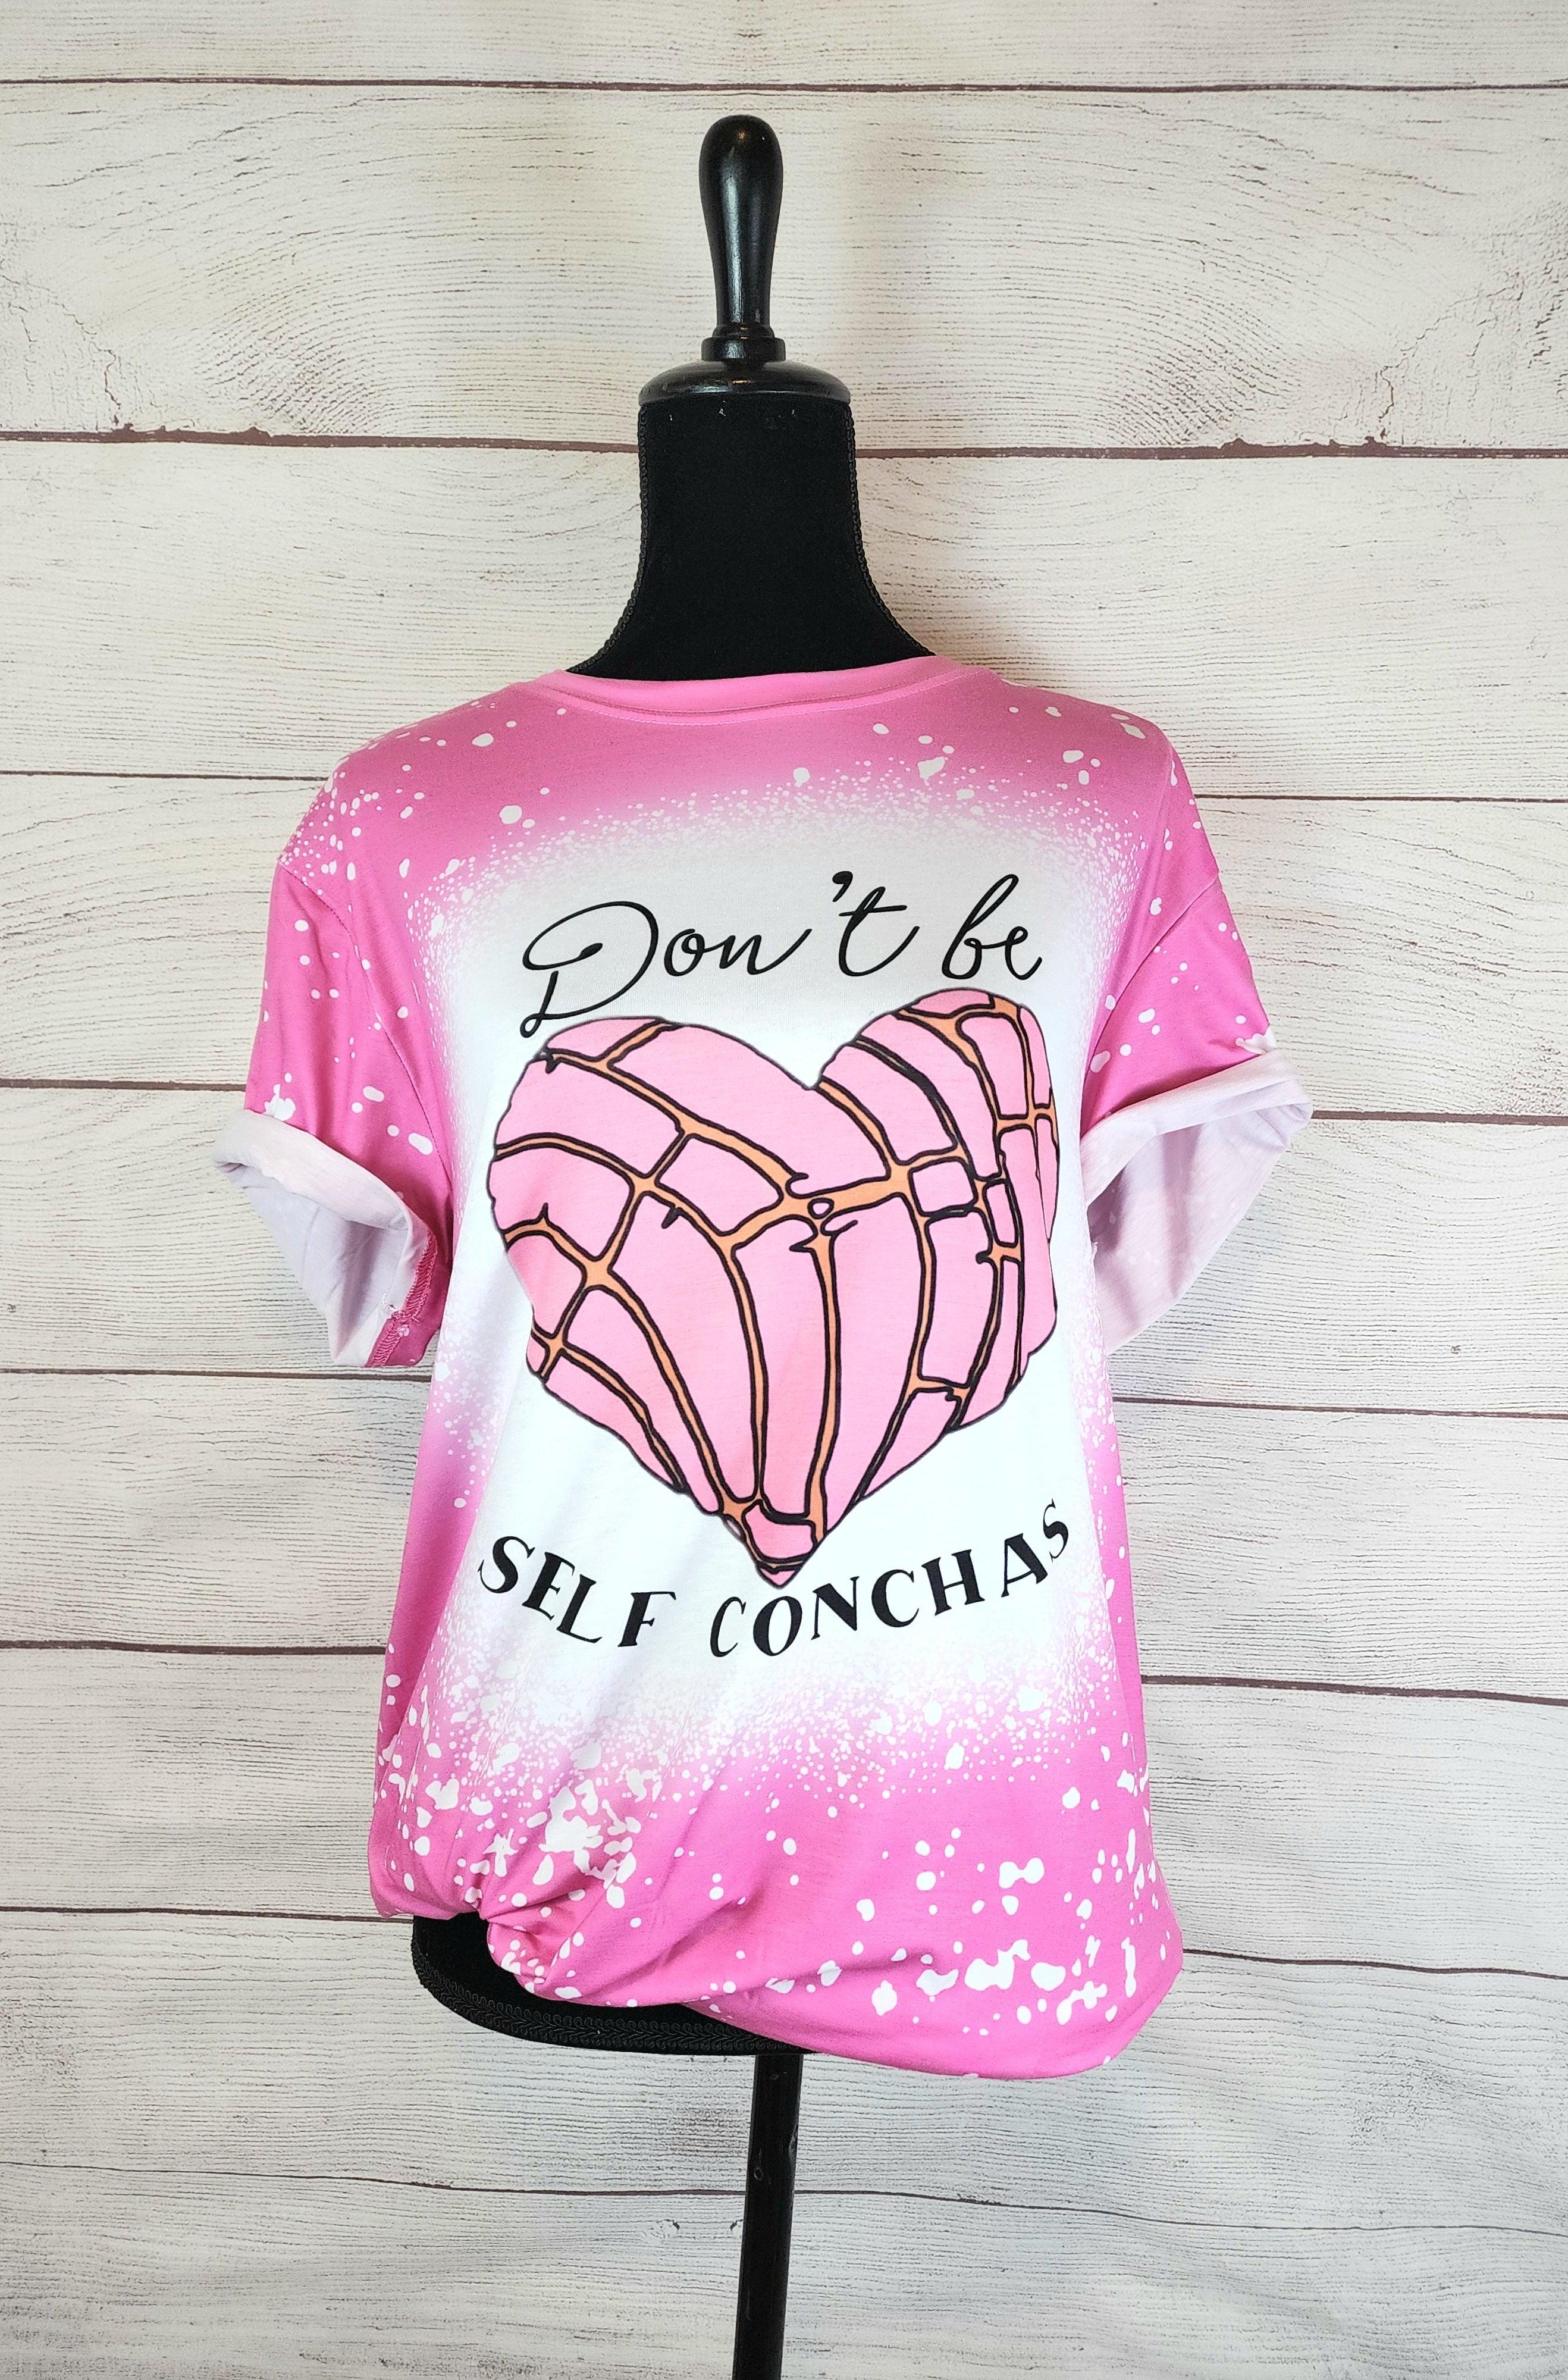 Don't Be Self Conchas- Pink Bleach Effect Shirt - Rejoice In Creation